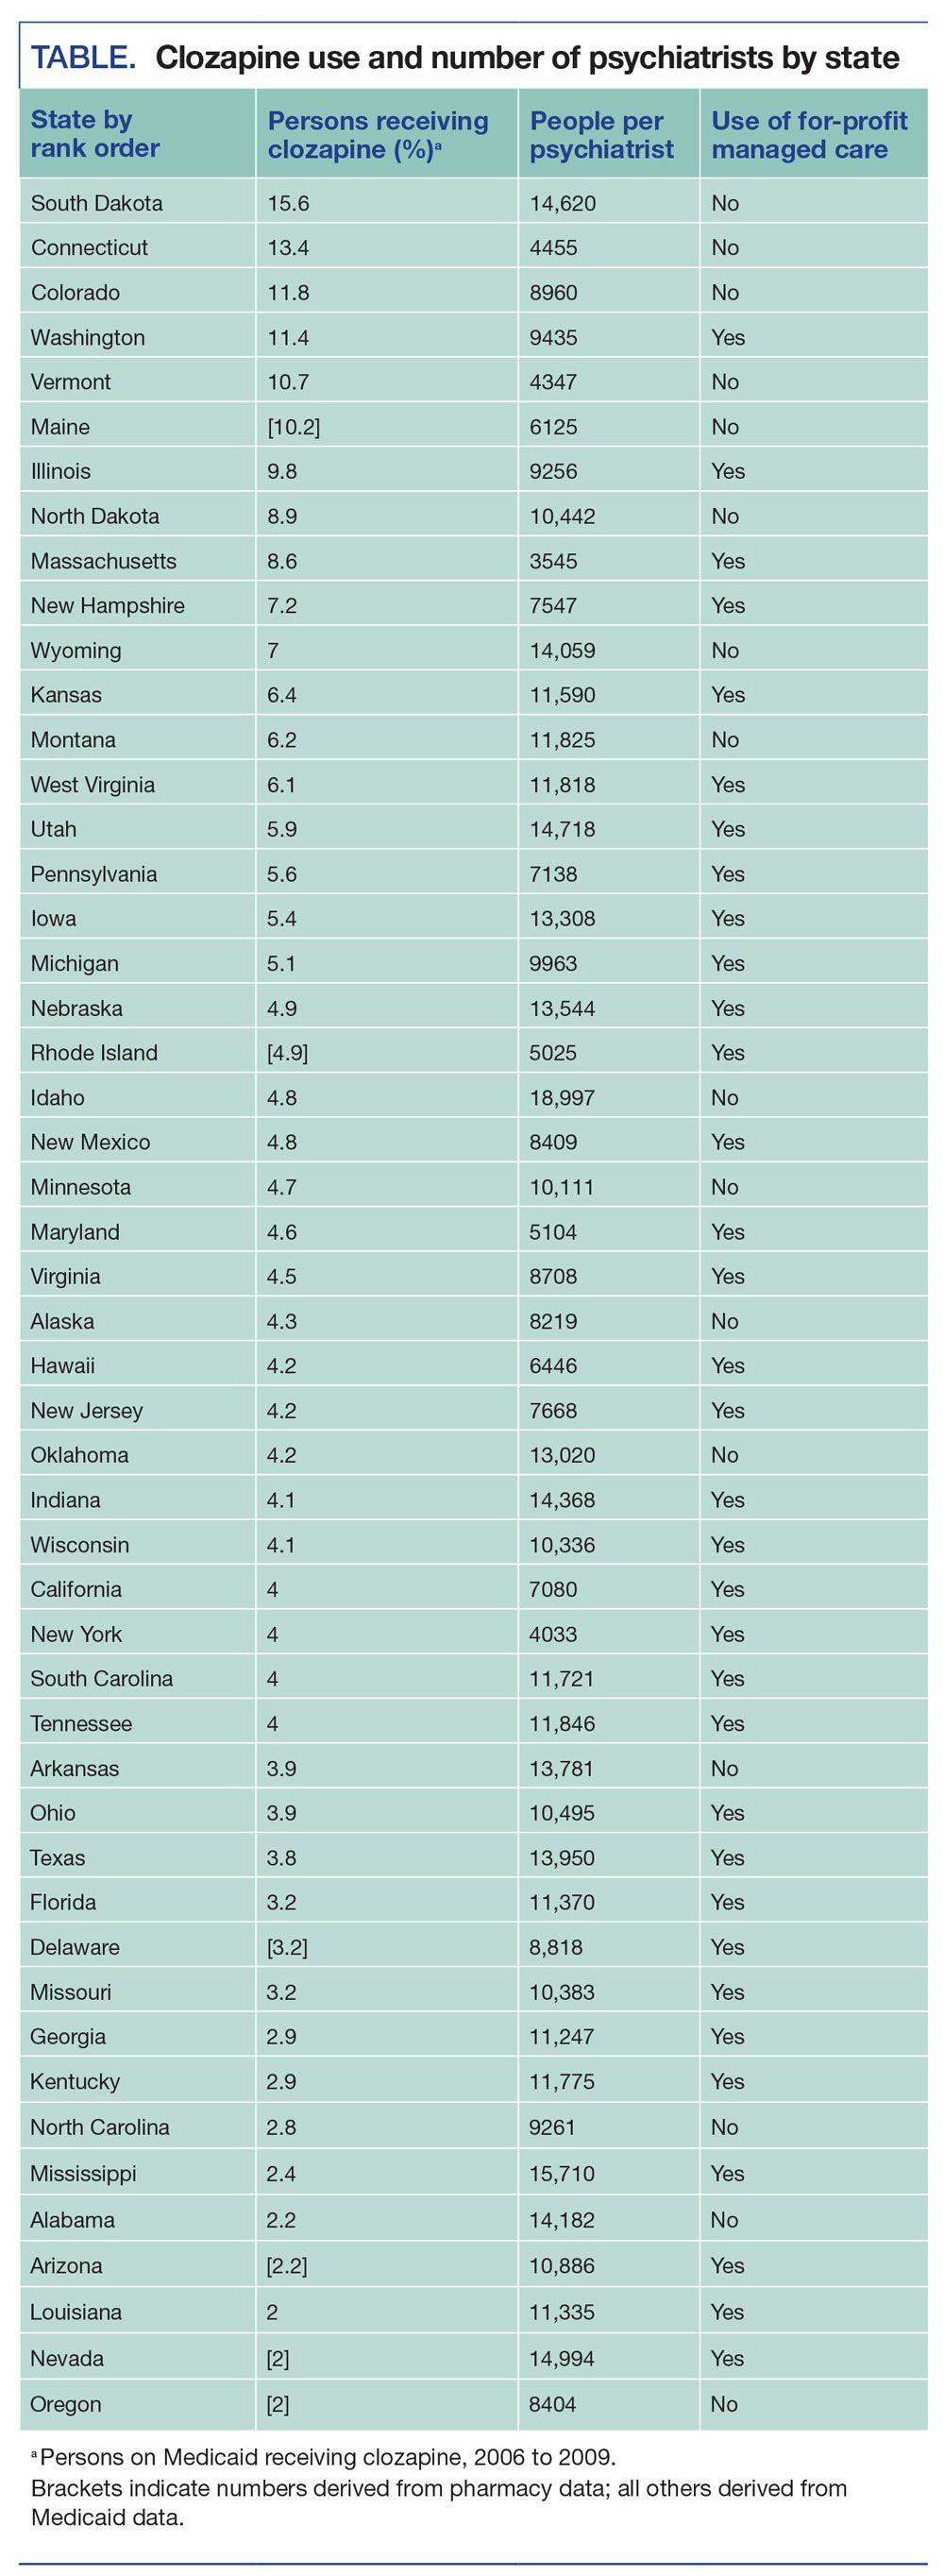 TABLE. Clozapine use and number of psychiatrists by state